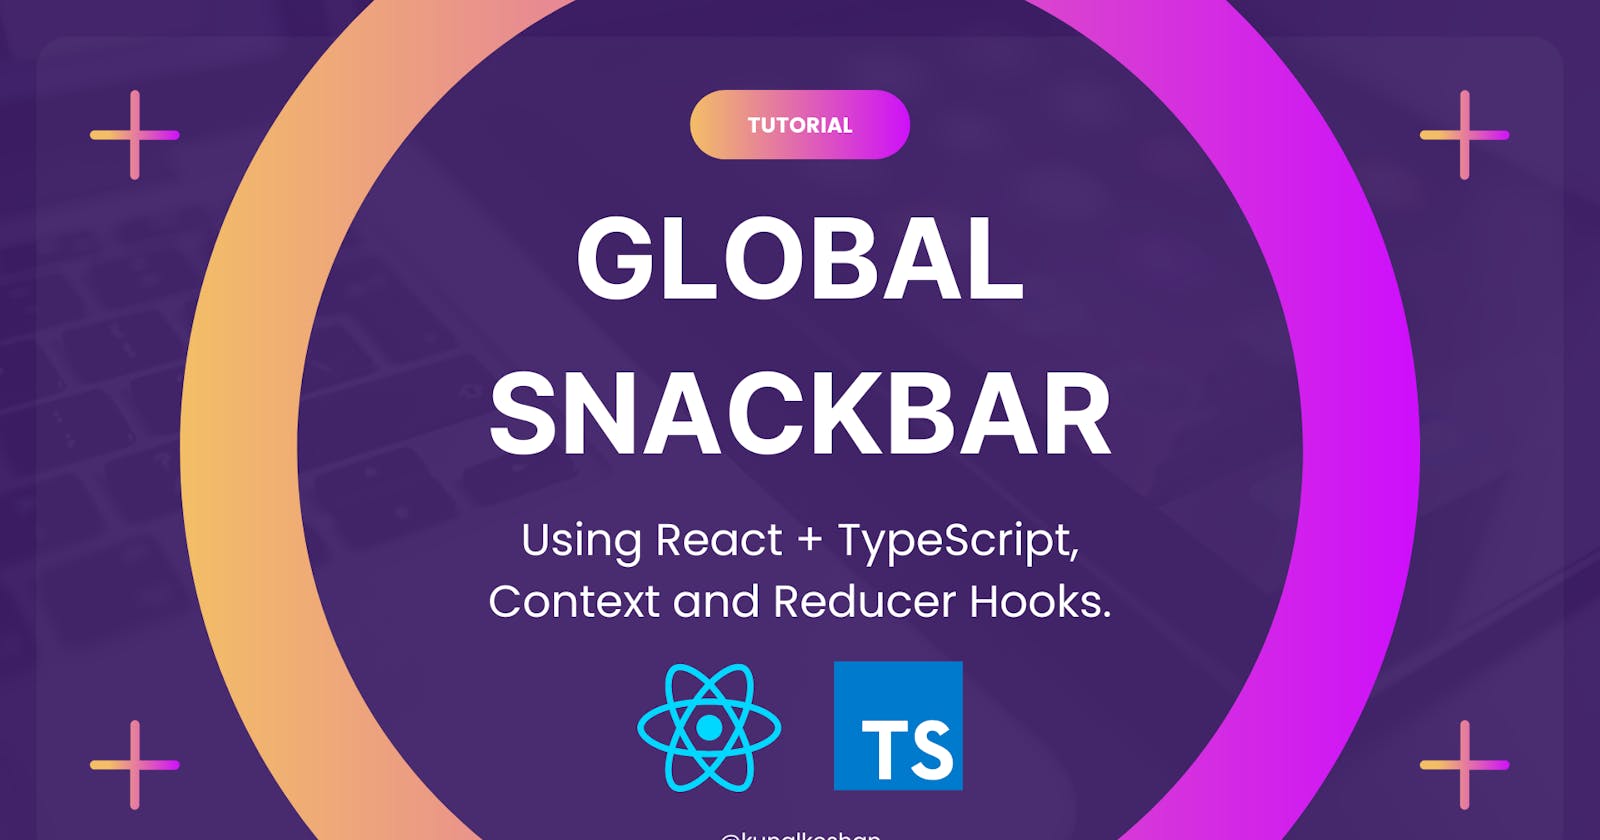 Learn How to use Context and Reducer Hooks in React.js by Creating a Global Snackbar.